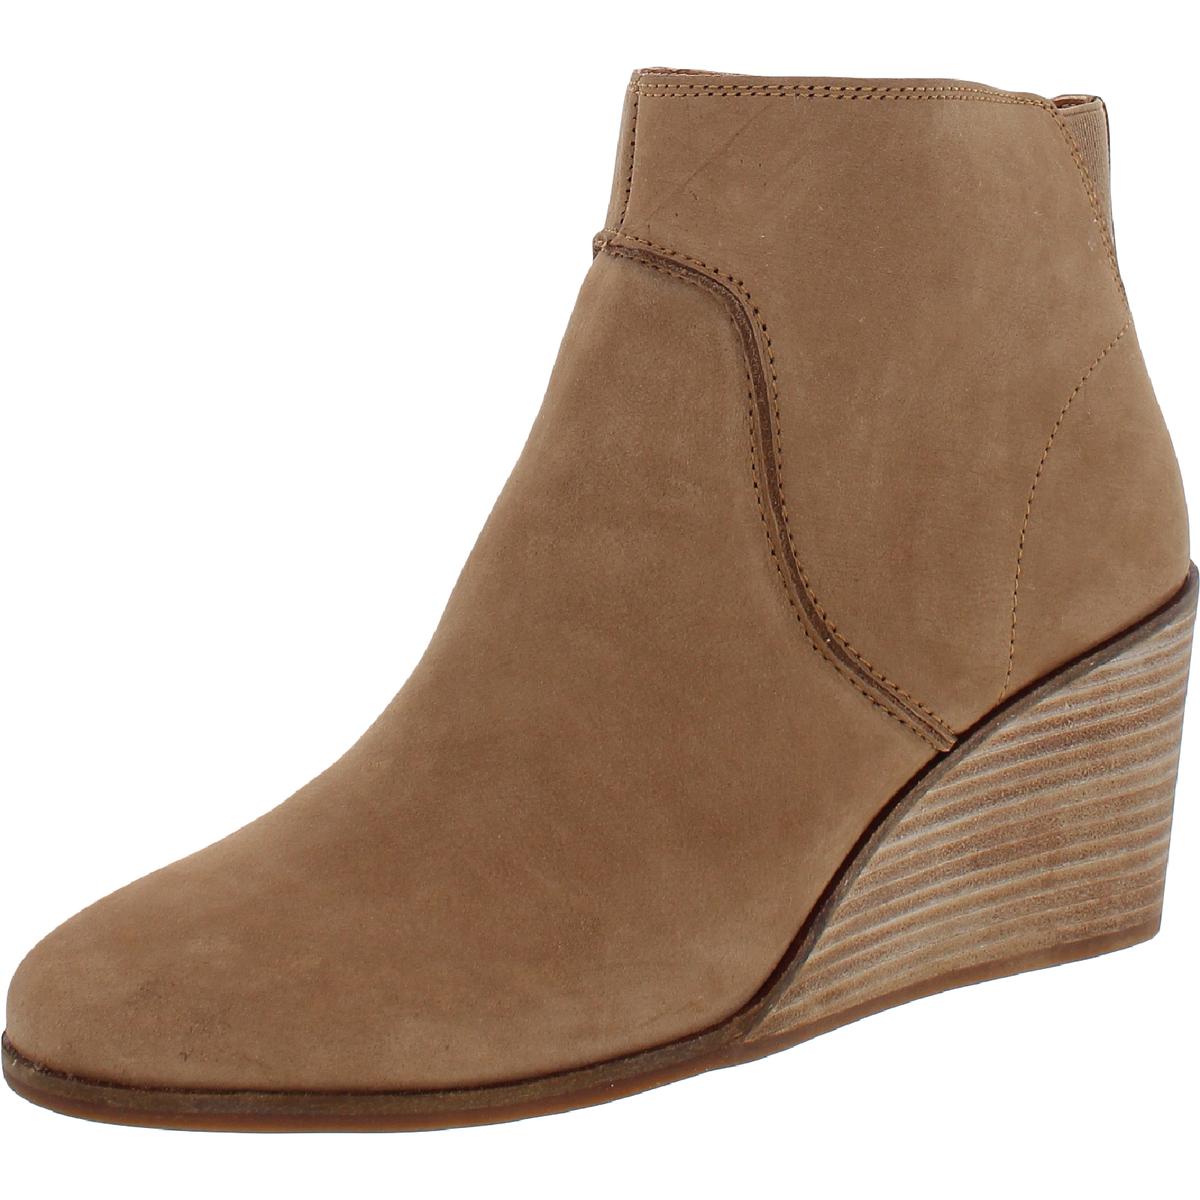 Lucky Brand Zanta Women's Leather Wedge Pull On Ankle Booties